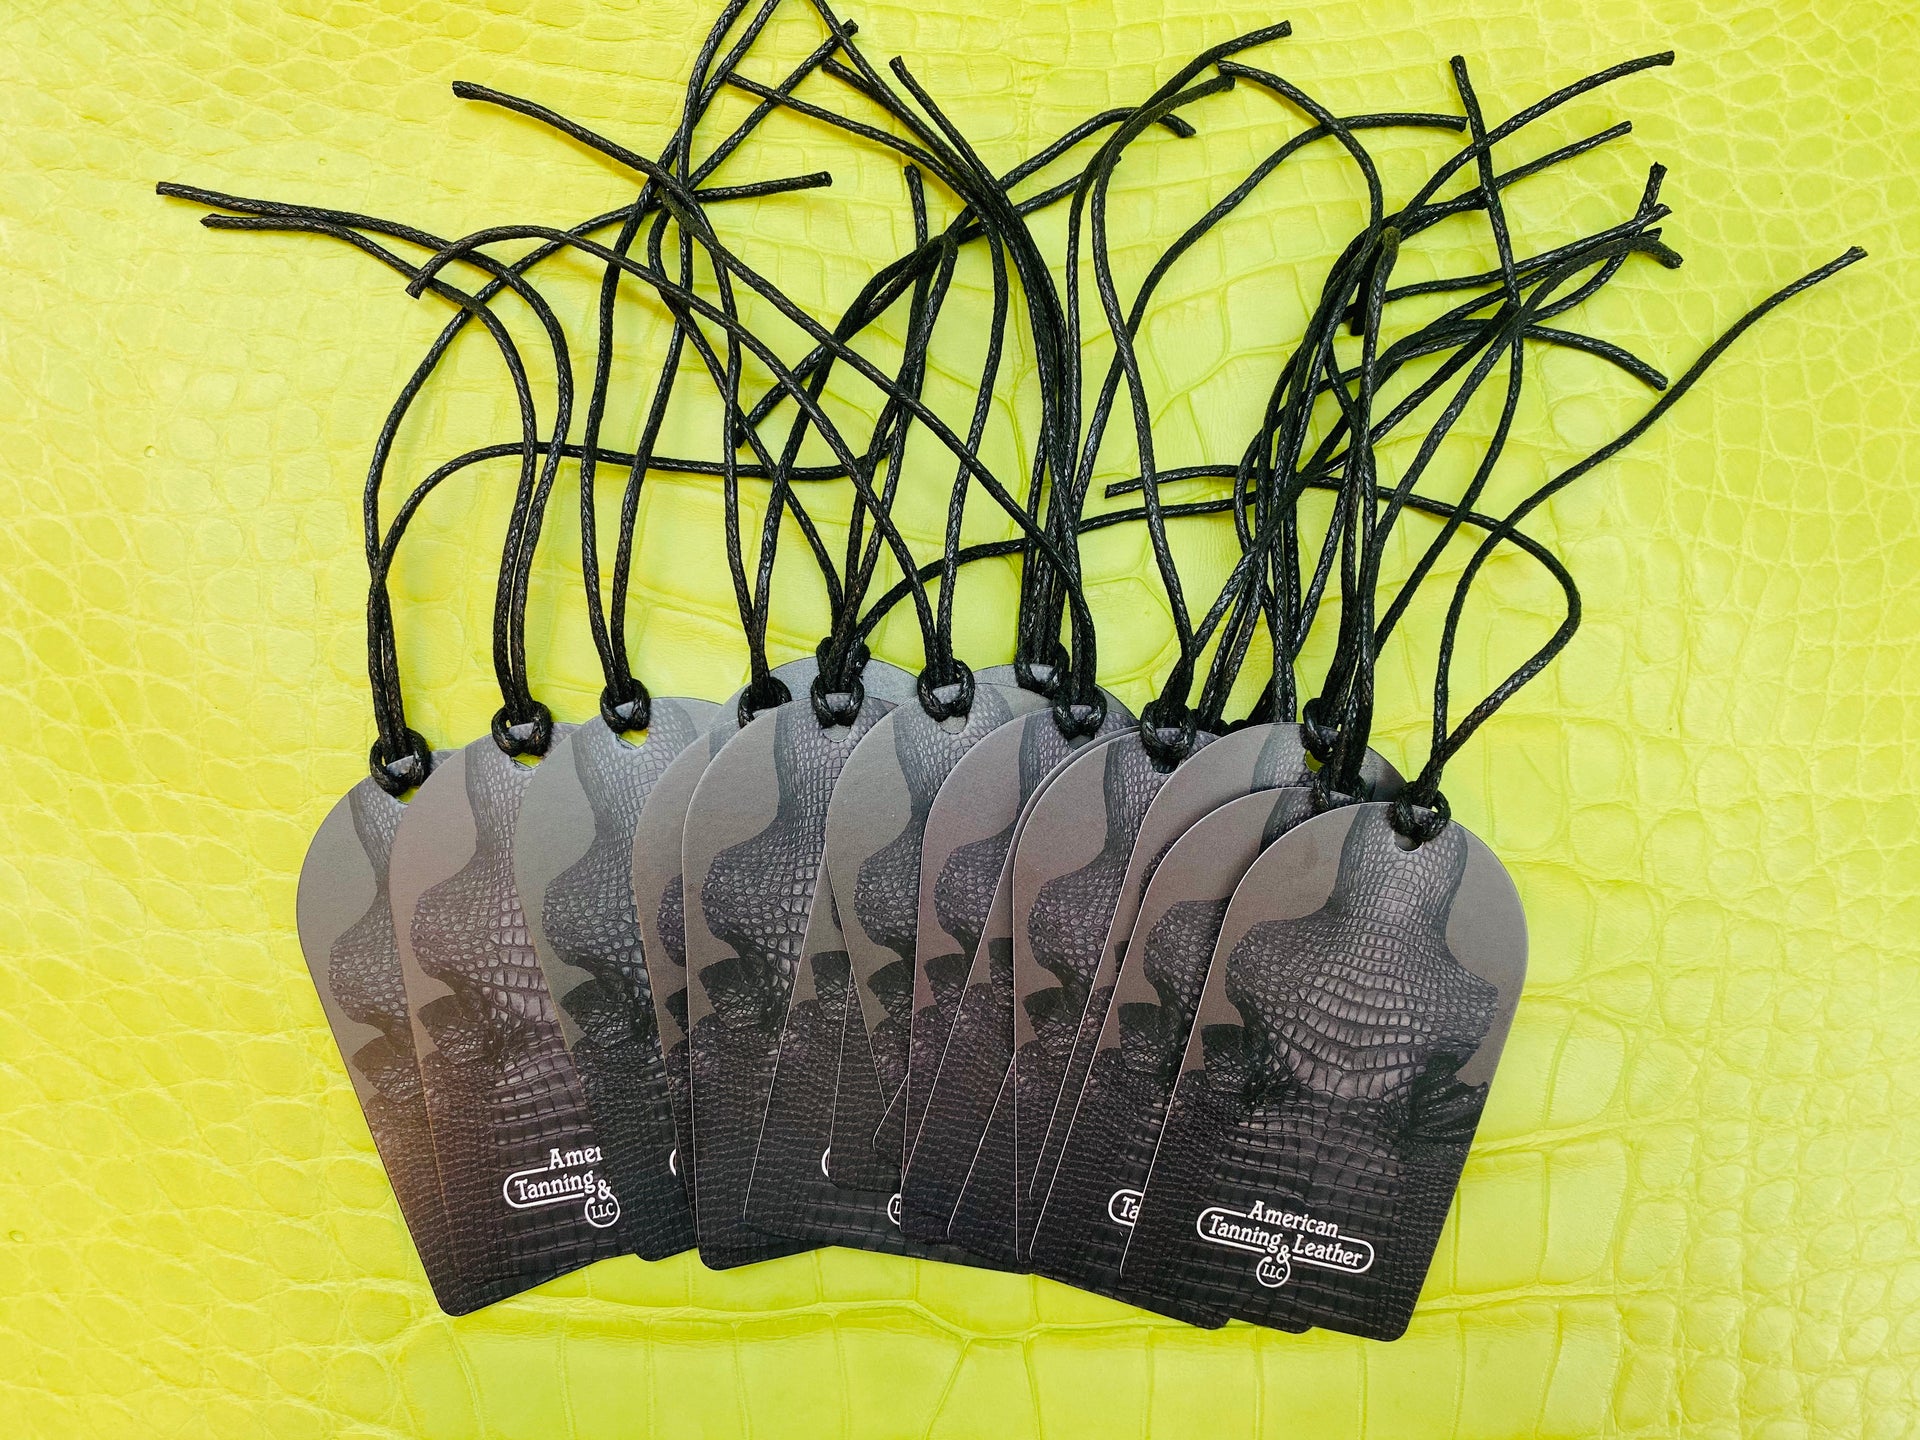 15 AMTAN Sustainability Hang Tags for $5.00 with Purchase